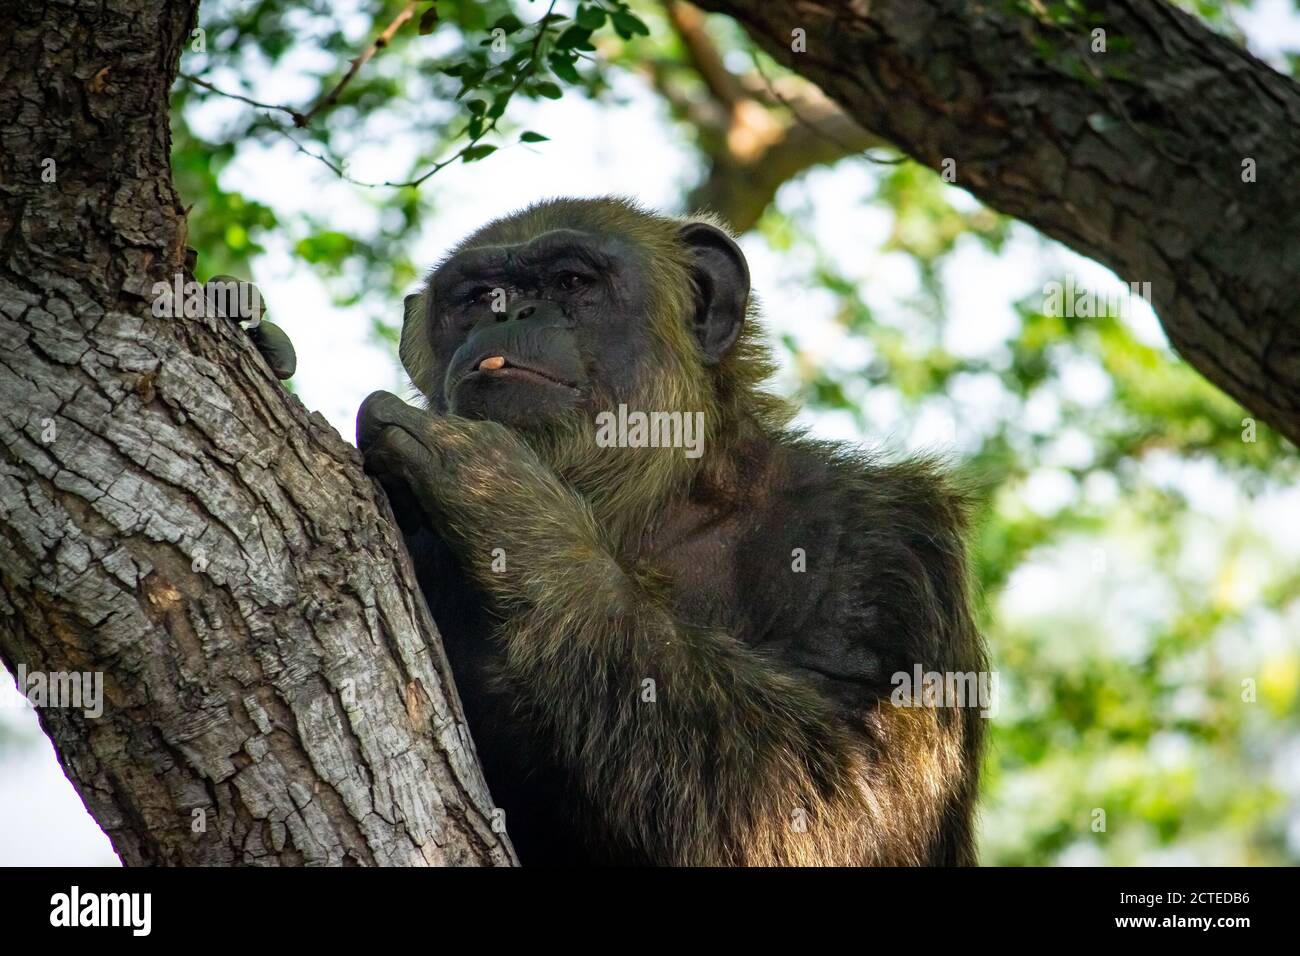 Young gigantic male Chimpanzee siting on a tree in Habitat forest jungle and looking at the camera. Chimpanzee in close up view with thoughtful expres Stock Photo